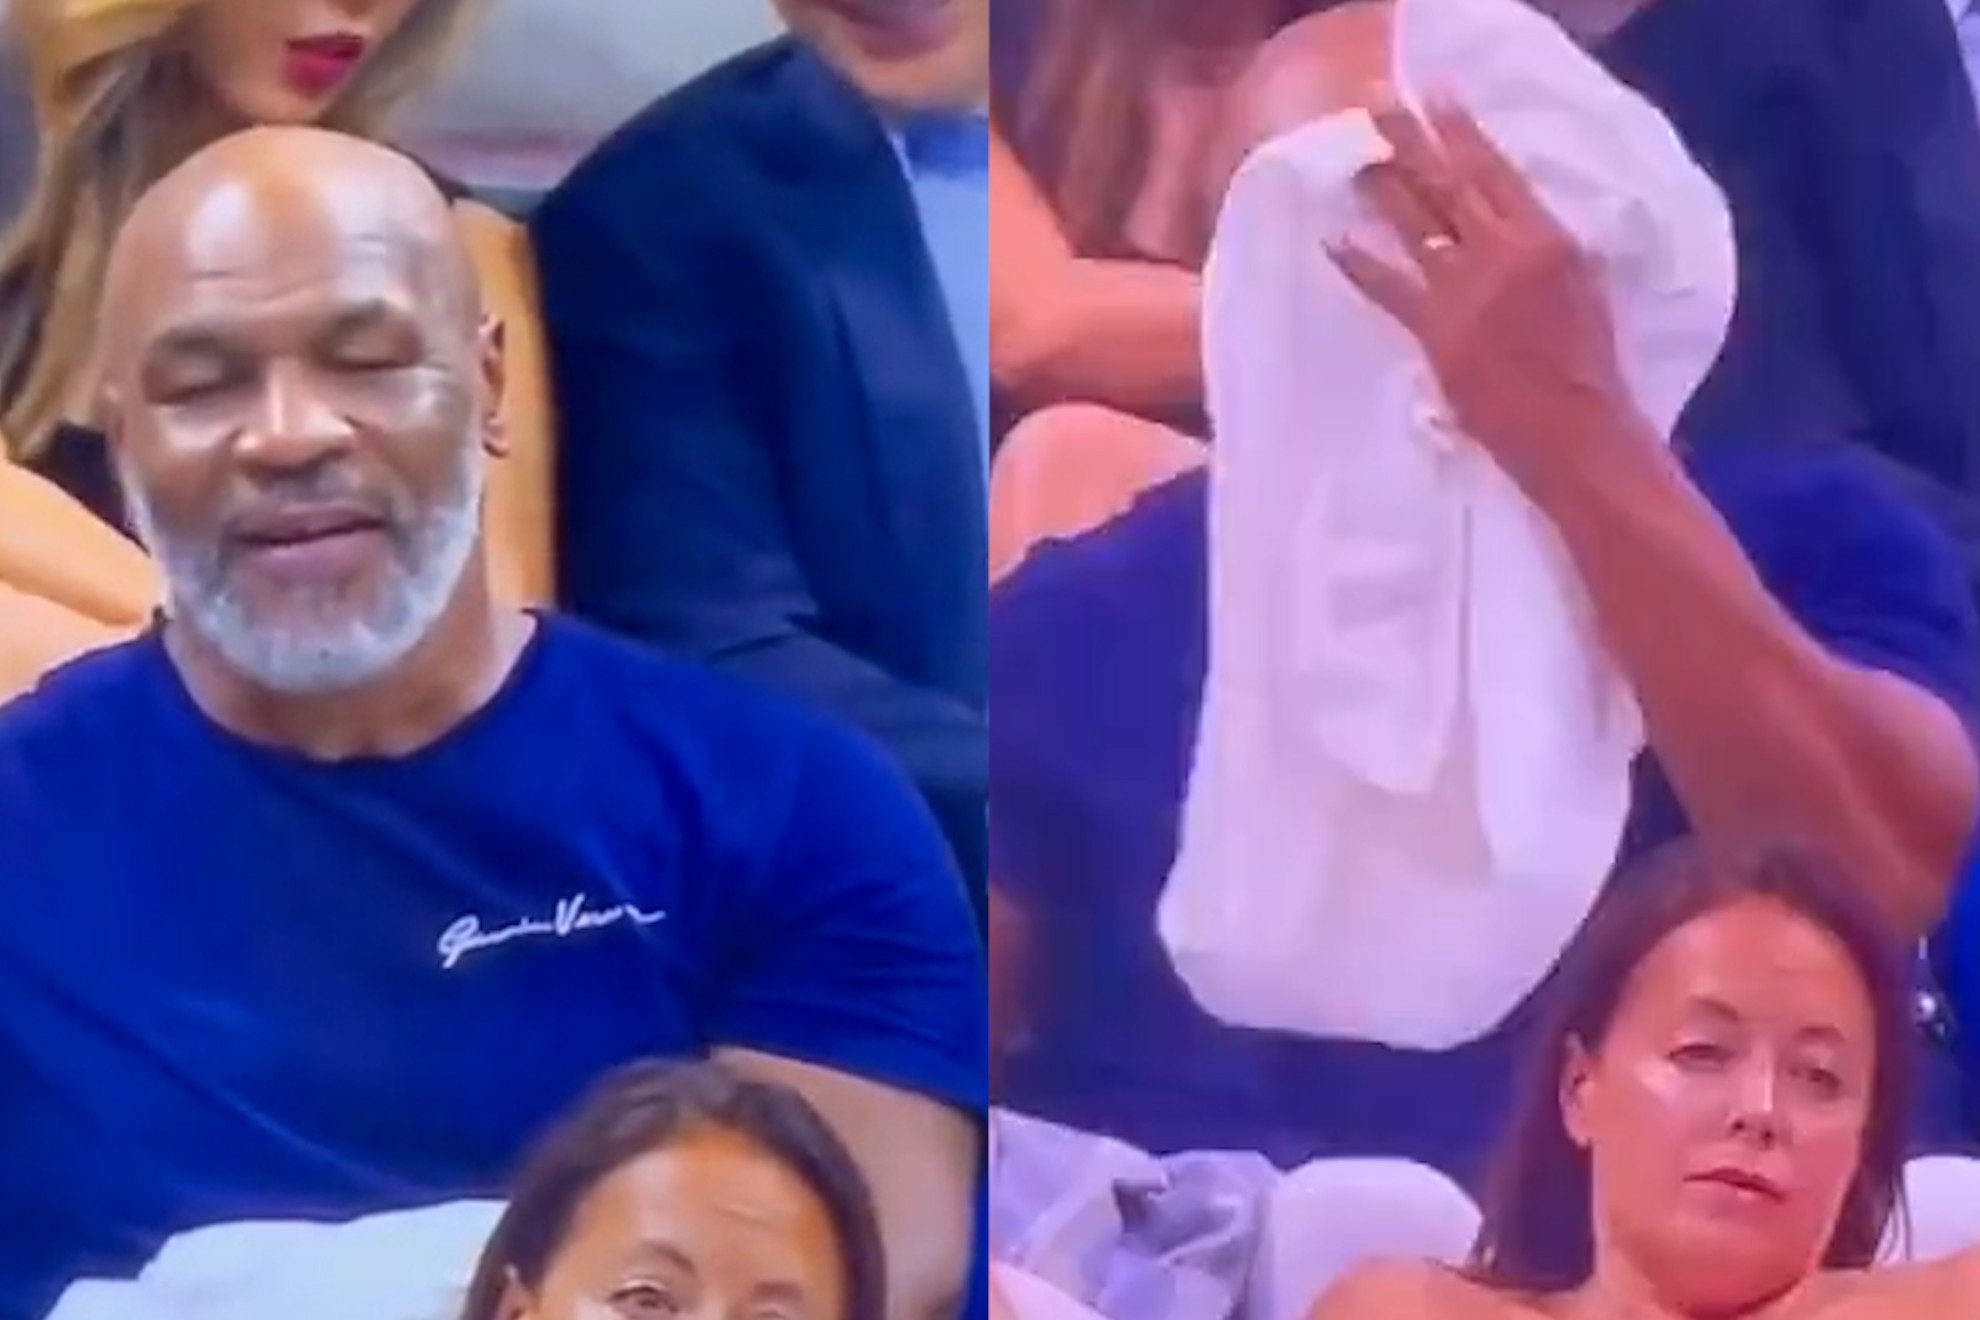 Was Mike Tyson  tripping on shrooms during Serena Williams match?